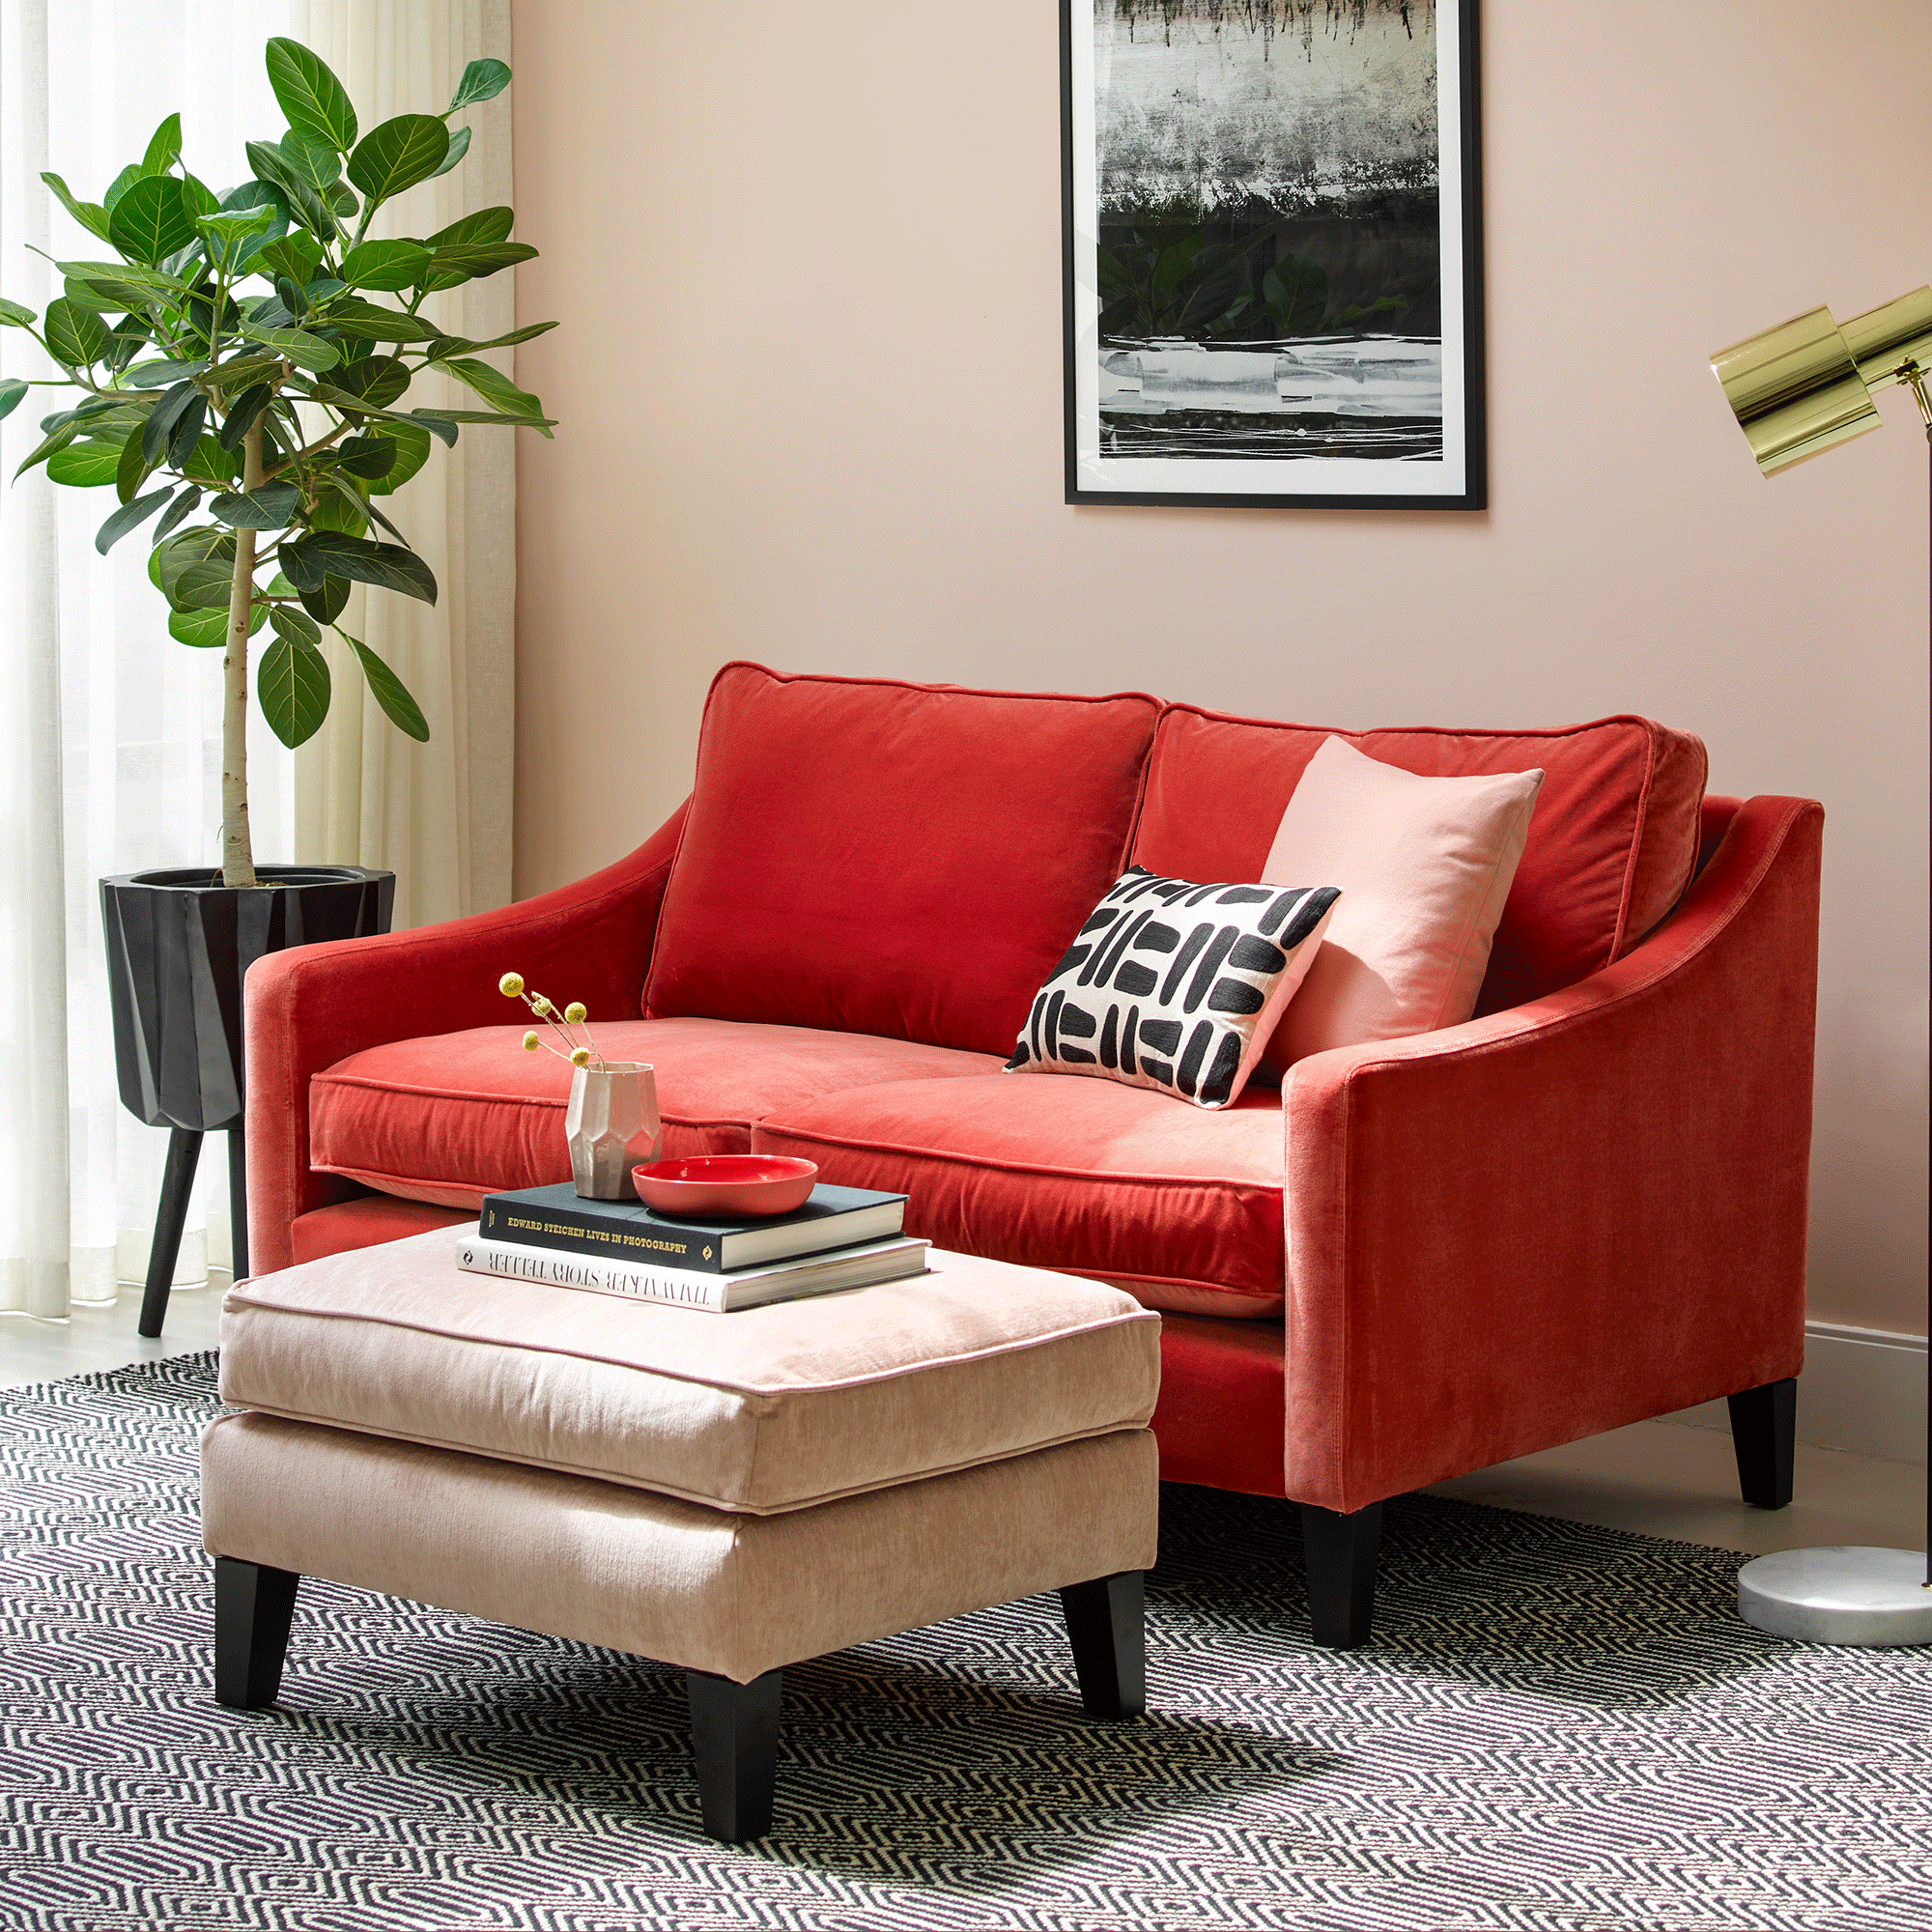 Red sofa in pink room with house plant